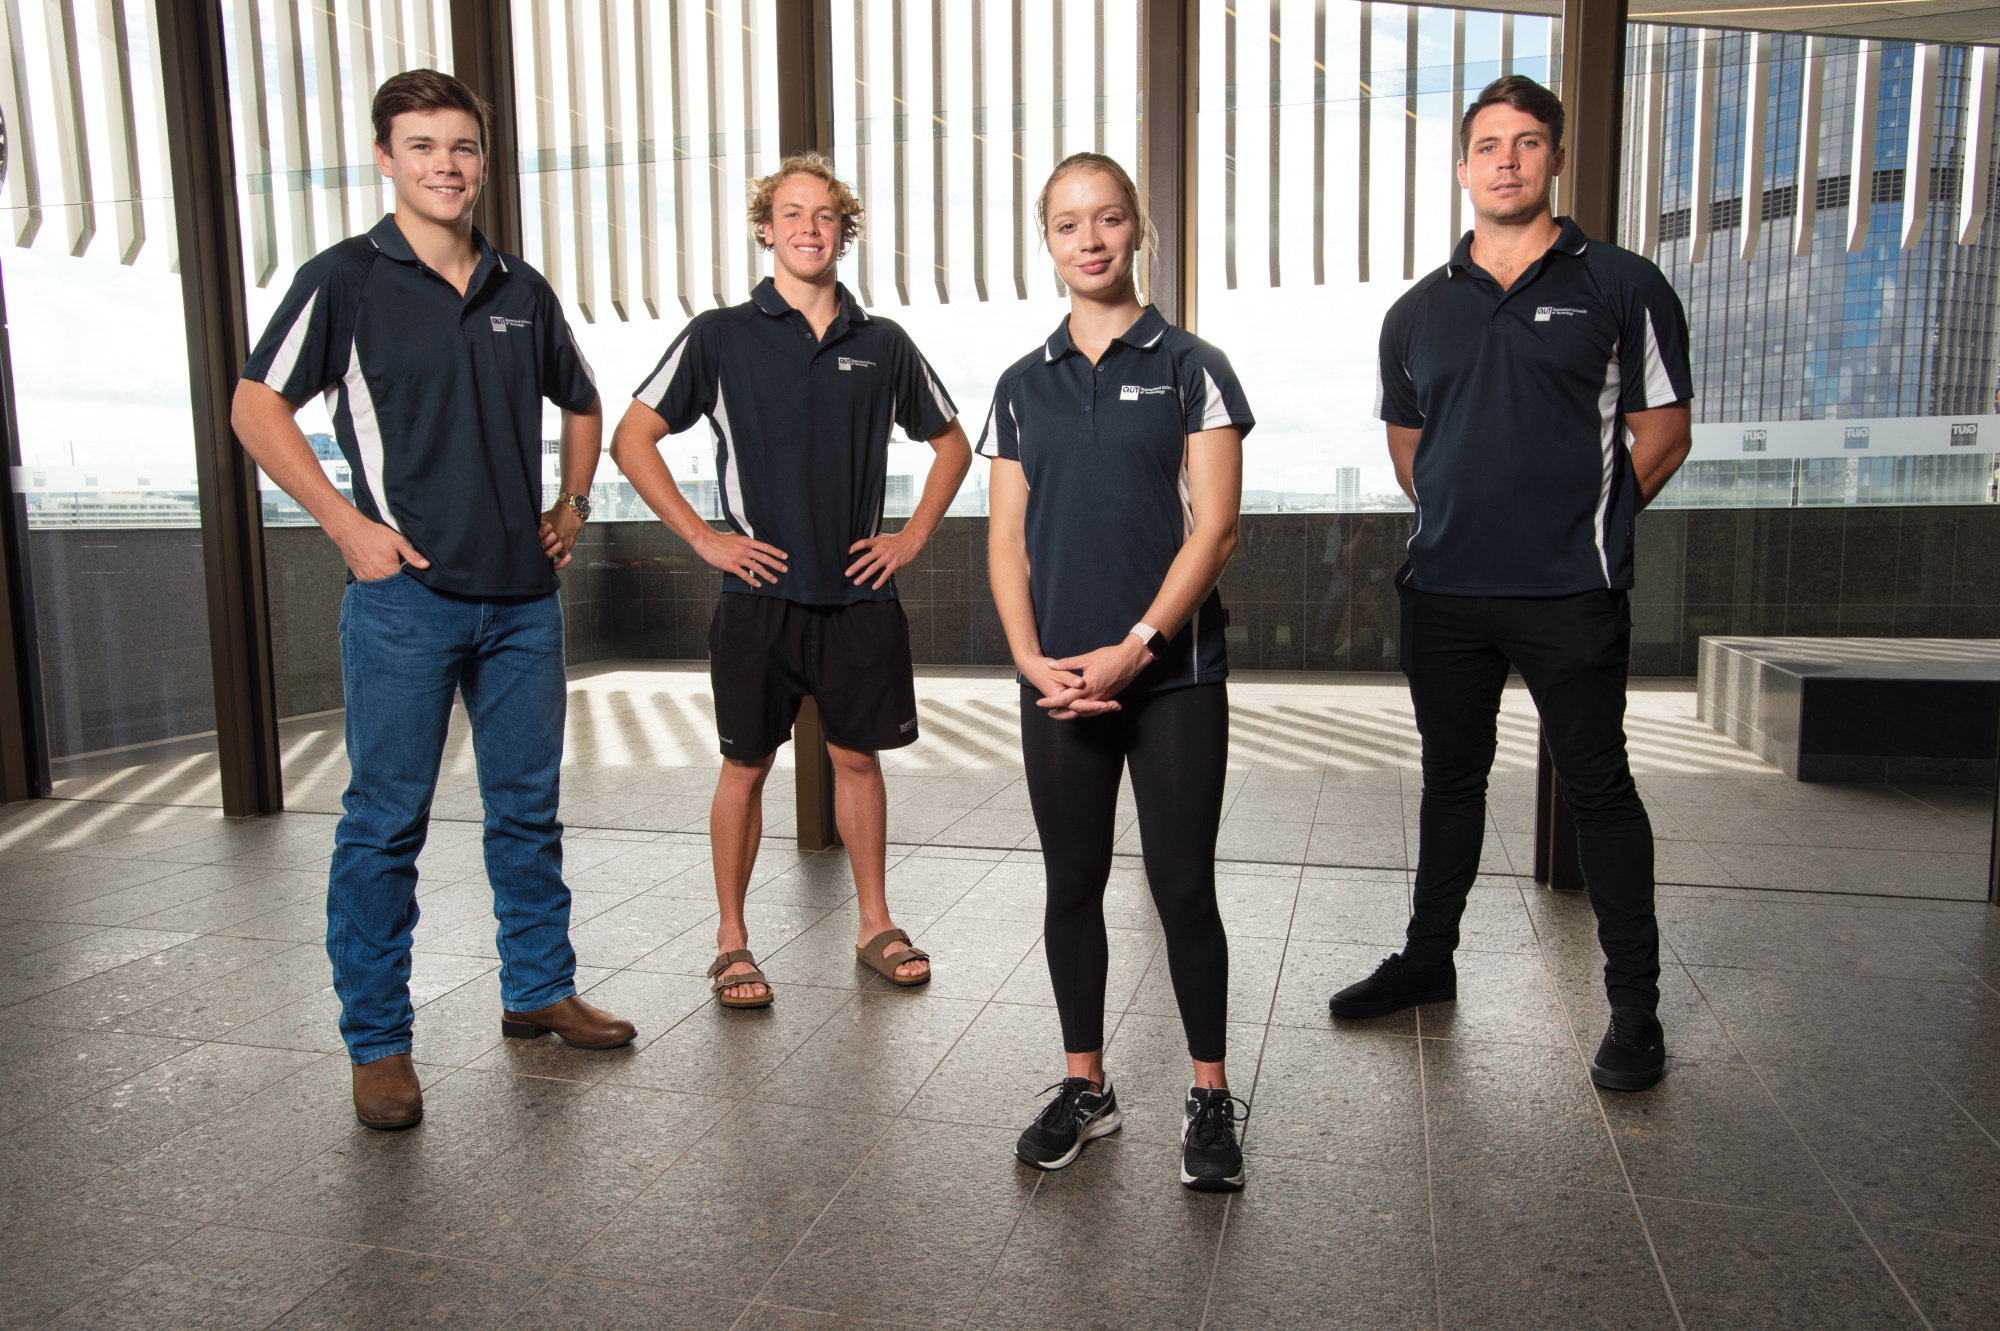 AIS - QUT Scholarship winners. Left to right: Jake Rynne (Bowls), Sam Short (Swimming), Isis Holt (Athletics) and Matthew Lyndement, (Weightlifting).